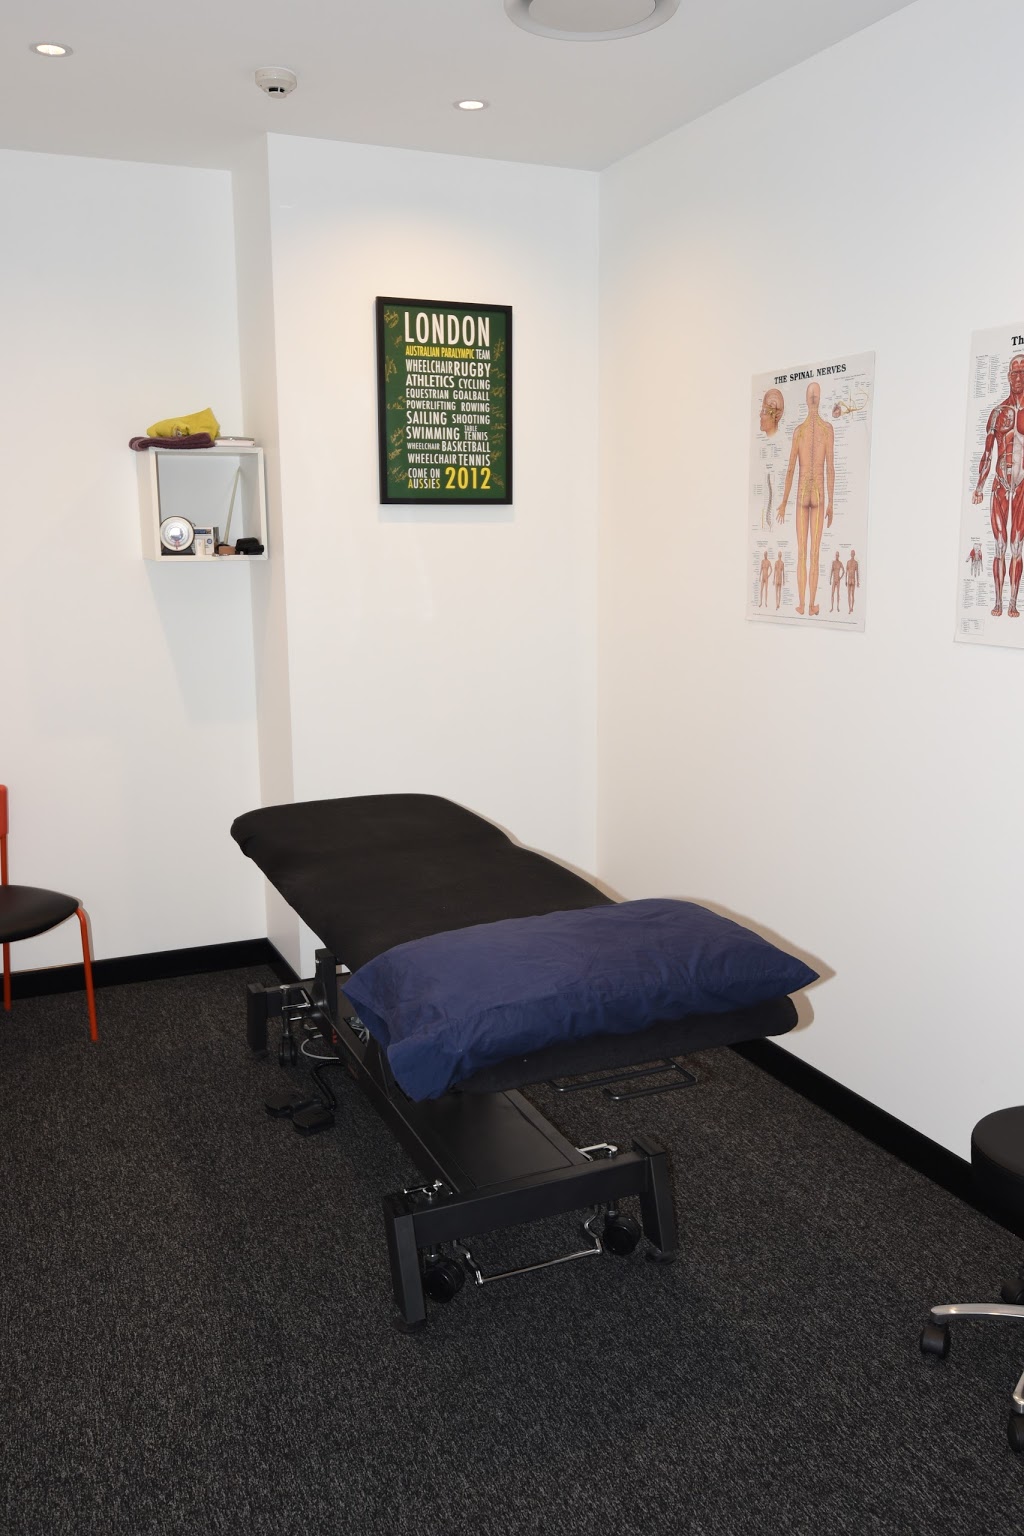 Kinetic Sports Physiotherapy | physiotherapist | 209 Hunter St, Newcastle NSW 2300, Australia | 0249292323 OR +61 2 4929 2323